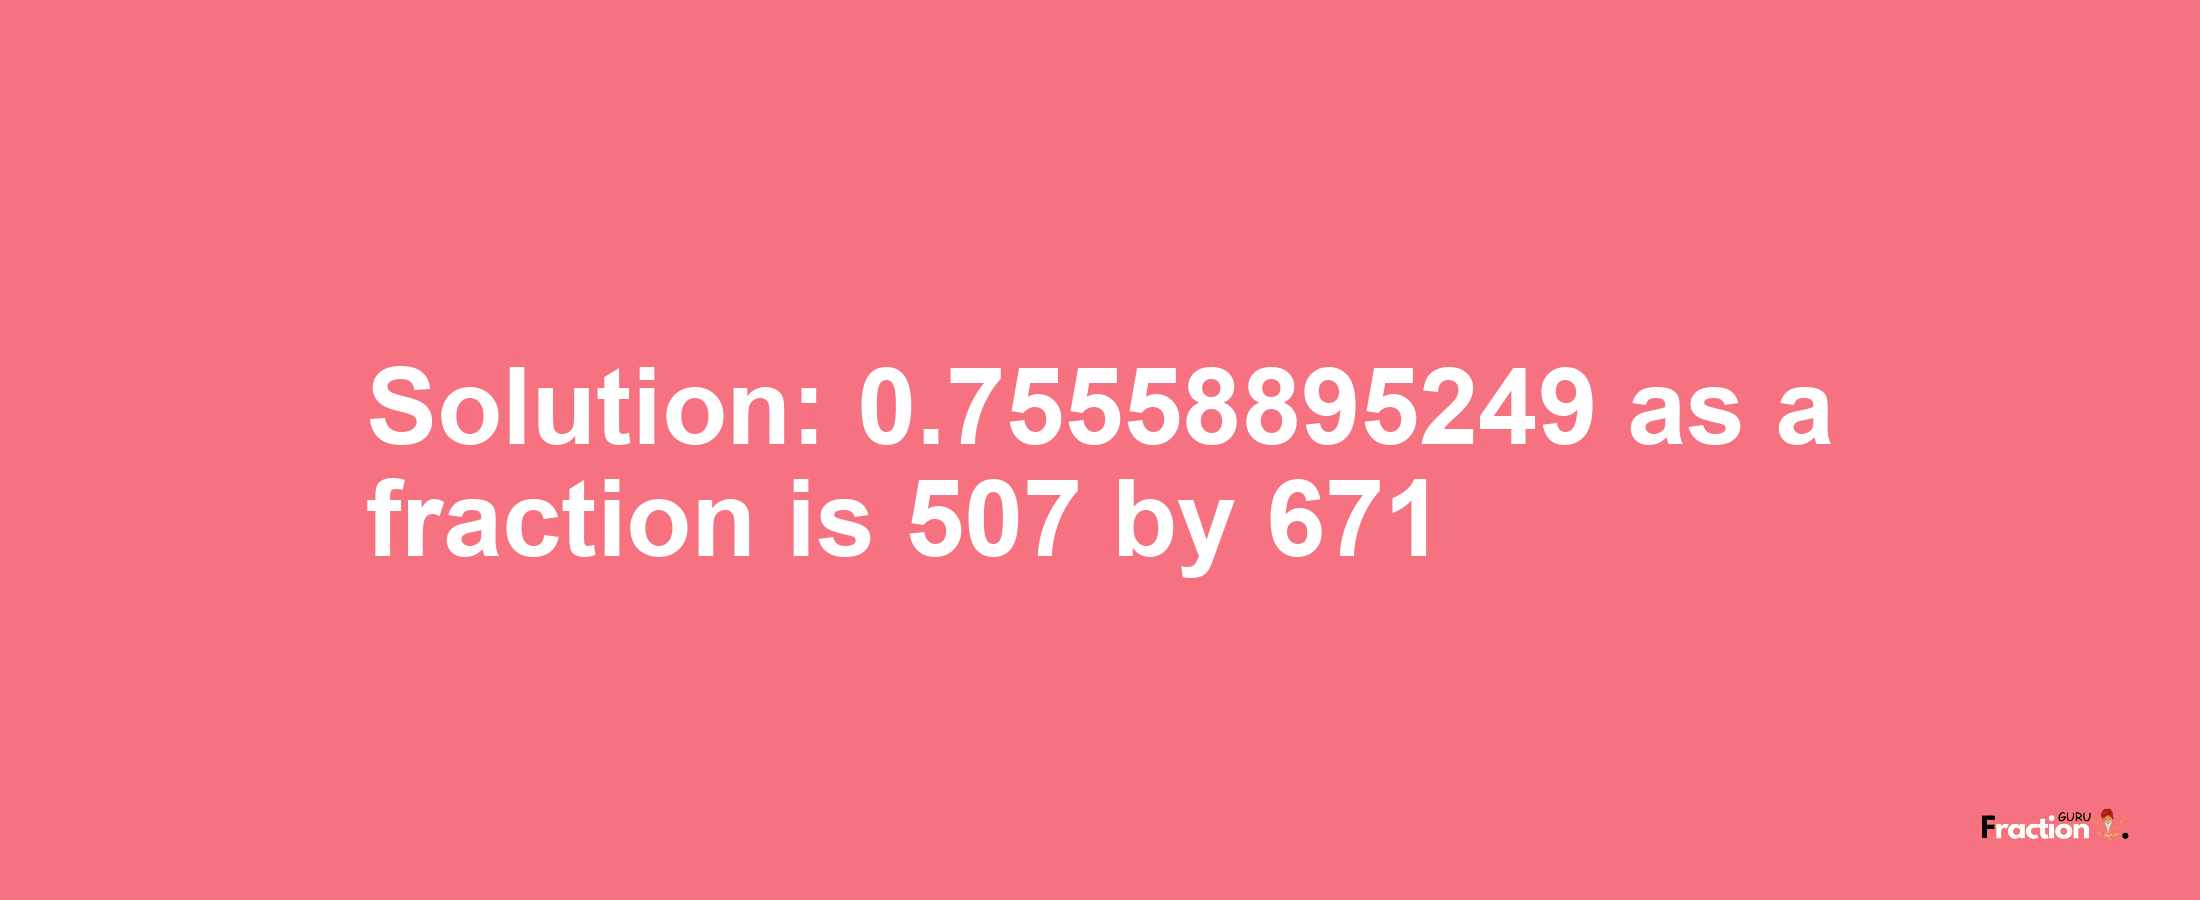 Solution:0.75558895249 as a fraction is 507/671